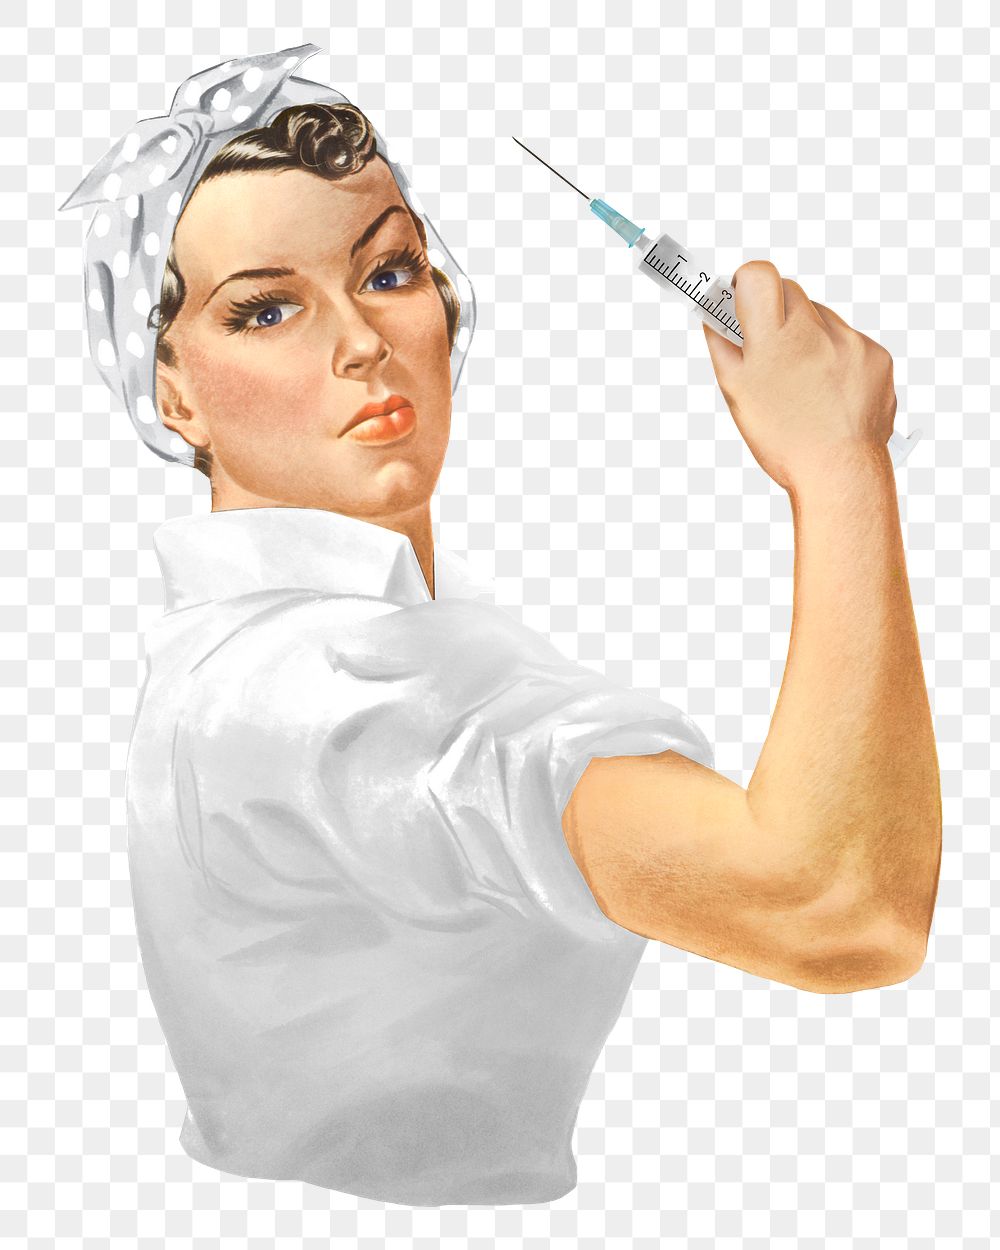 Nurse holding needle png element, transparent background. Remixed by rawpixel.